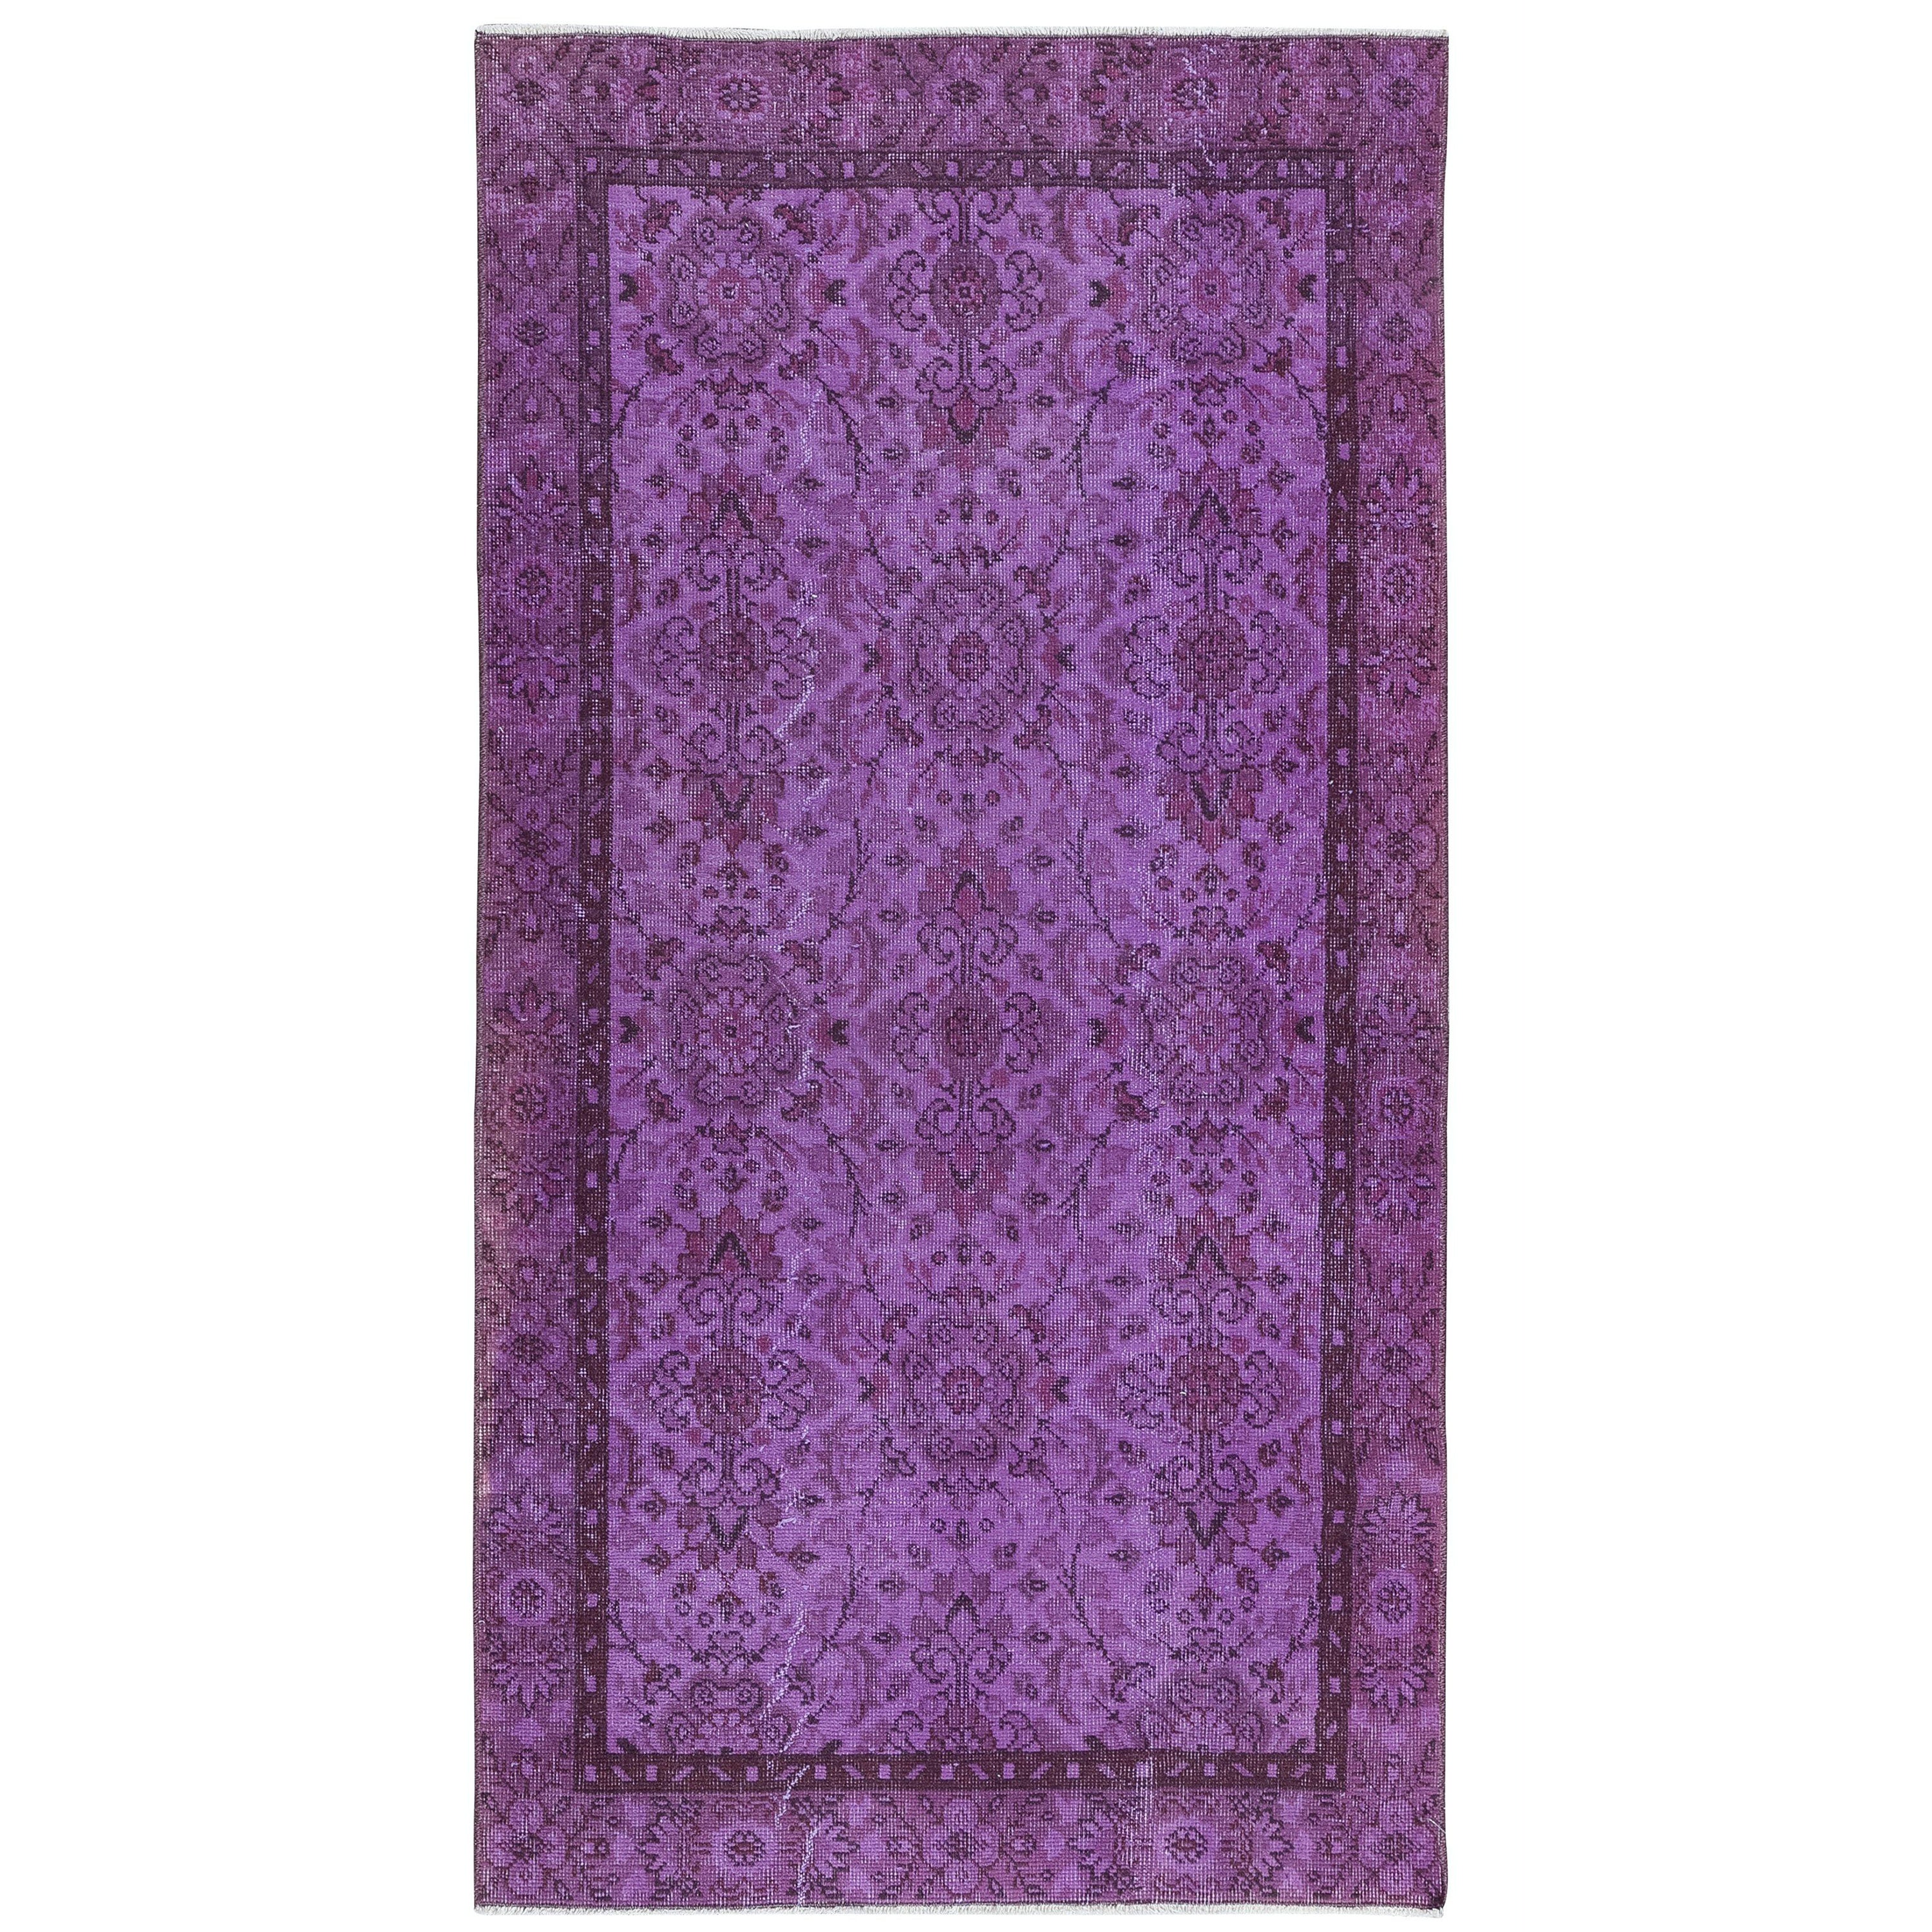 3.7x6.8 Ft Floral Area Rug in Purple for Modern Interiors, HandKnotted in Turkey For Sale